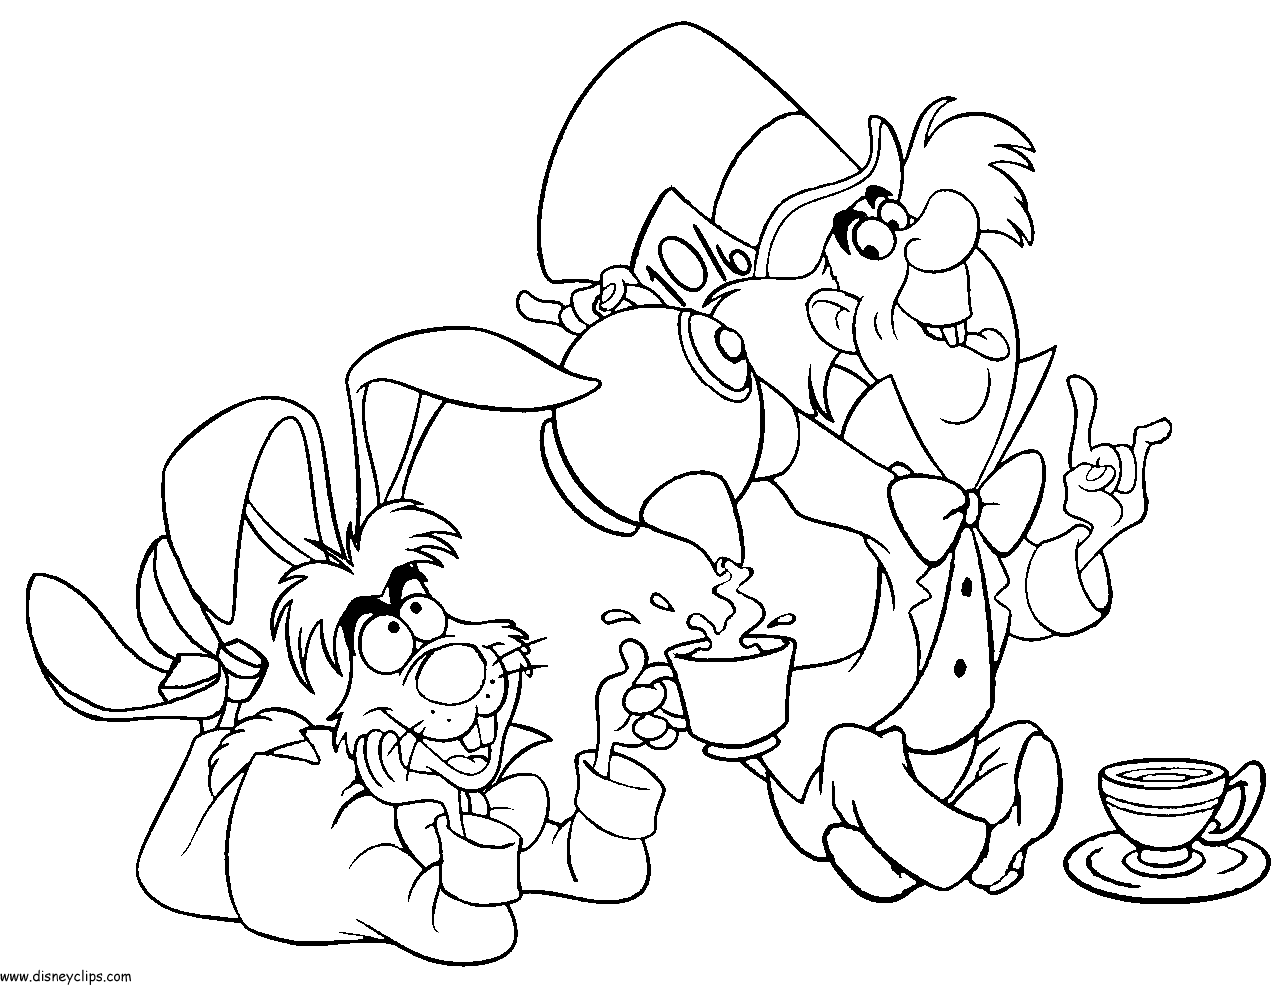 March Hare and Mad Hatter Coloring Pages